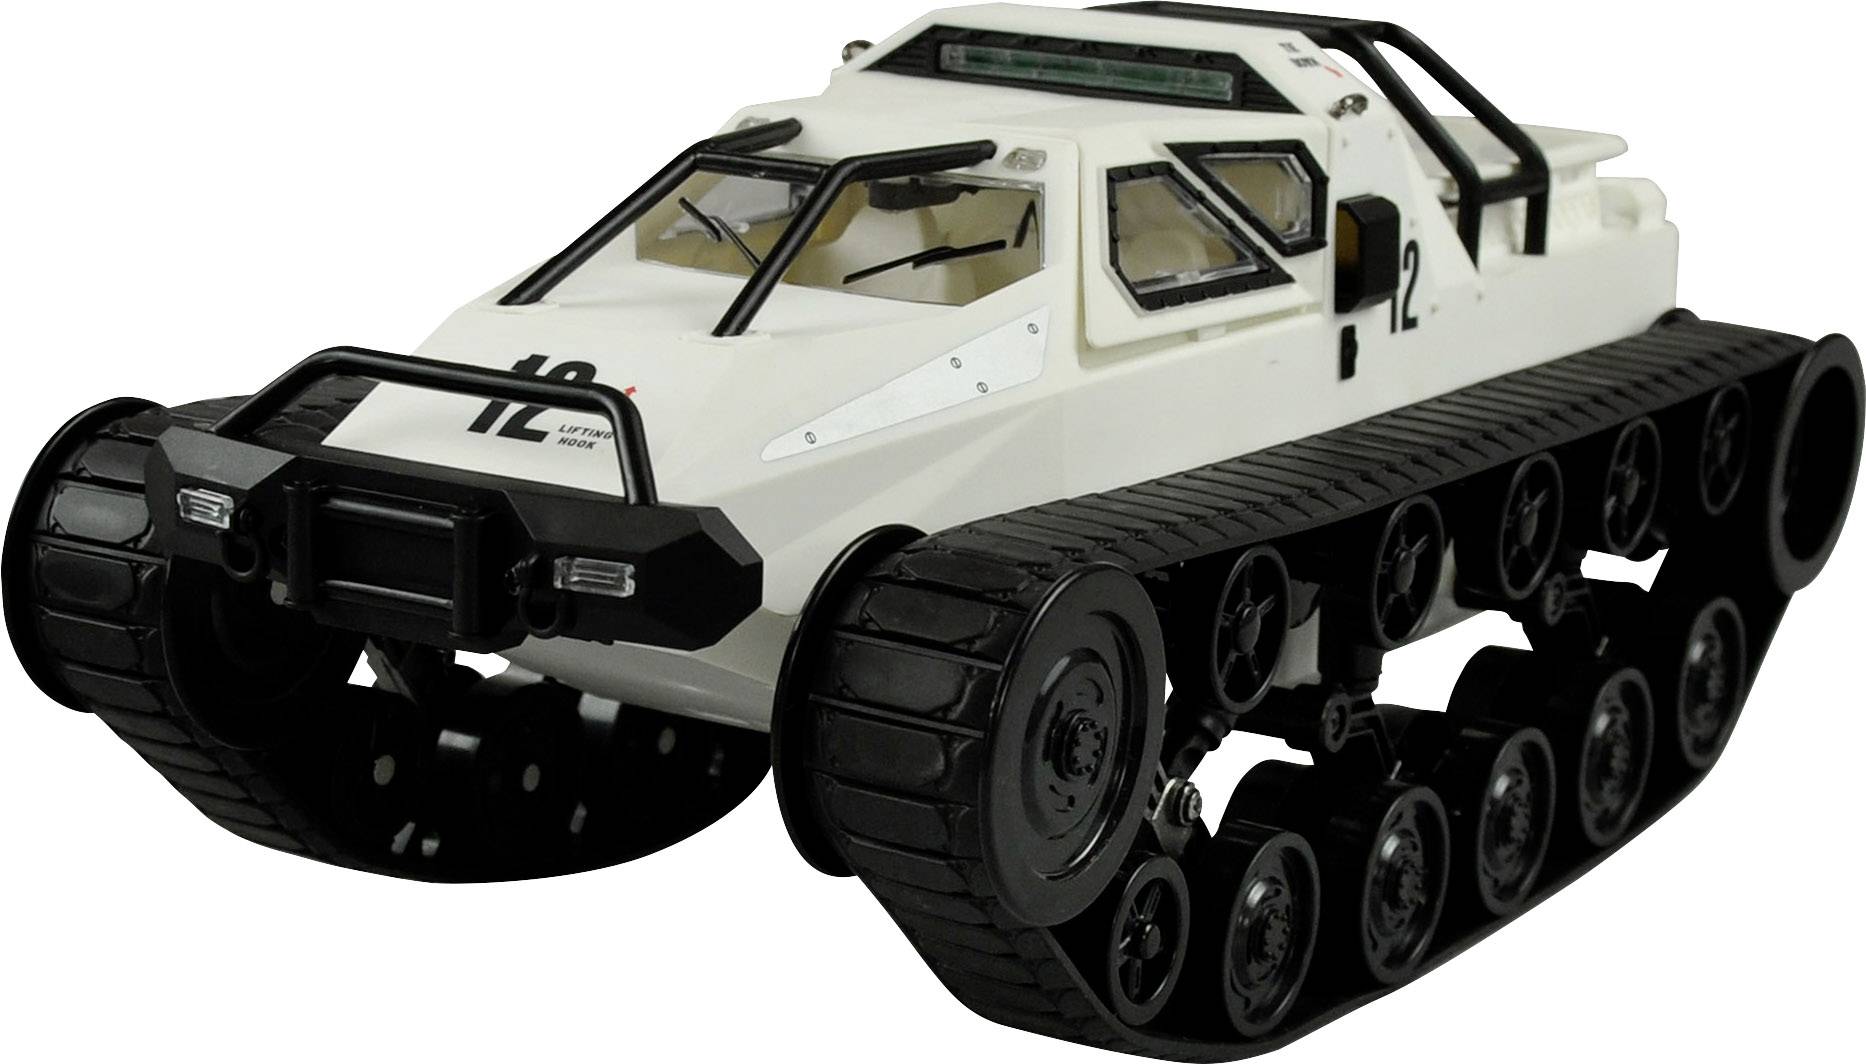 rc tracked vehicle with camera